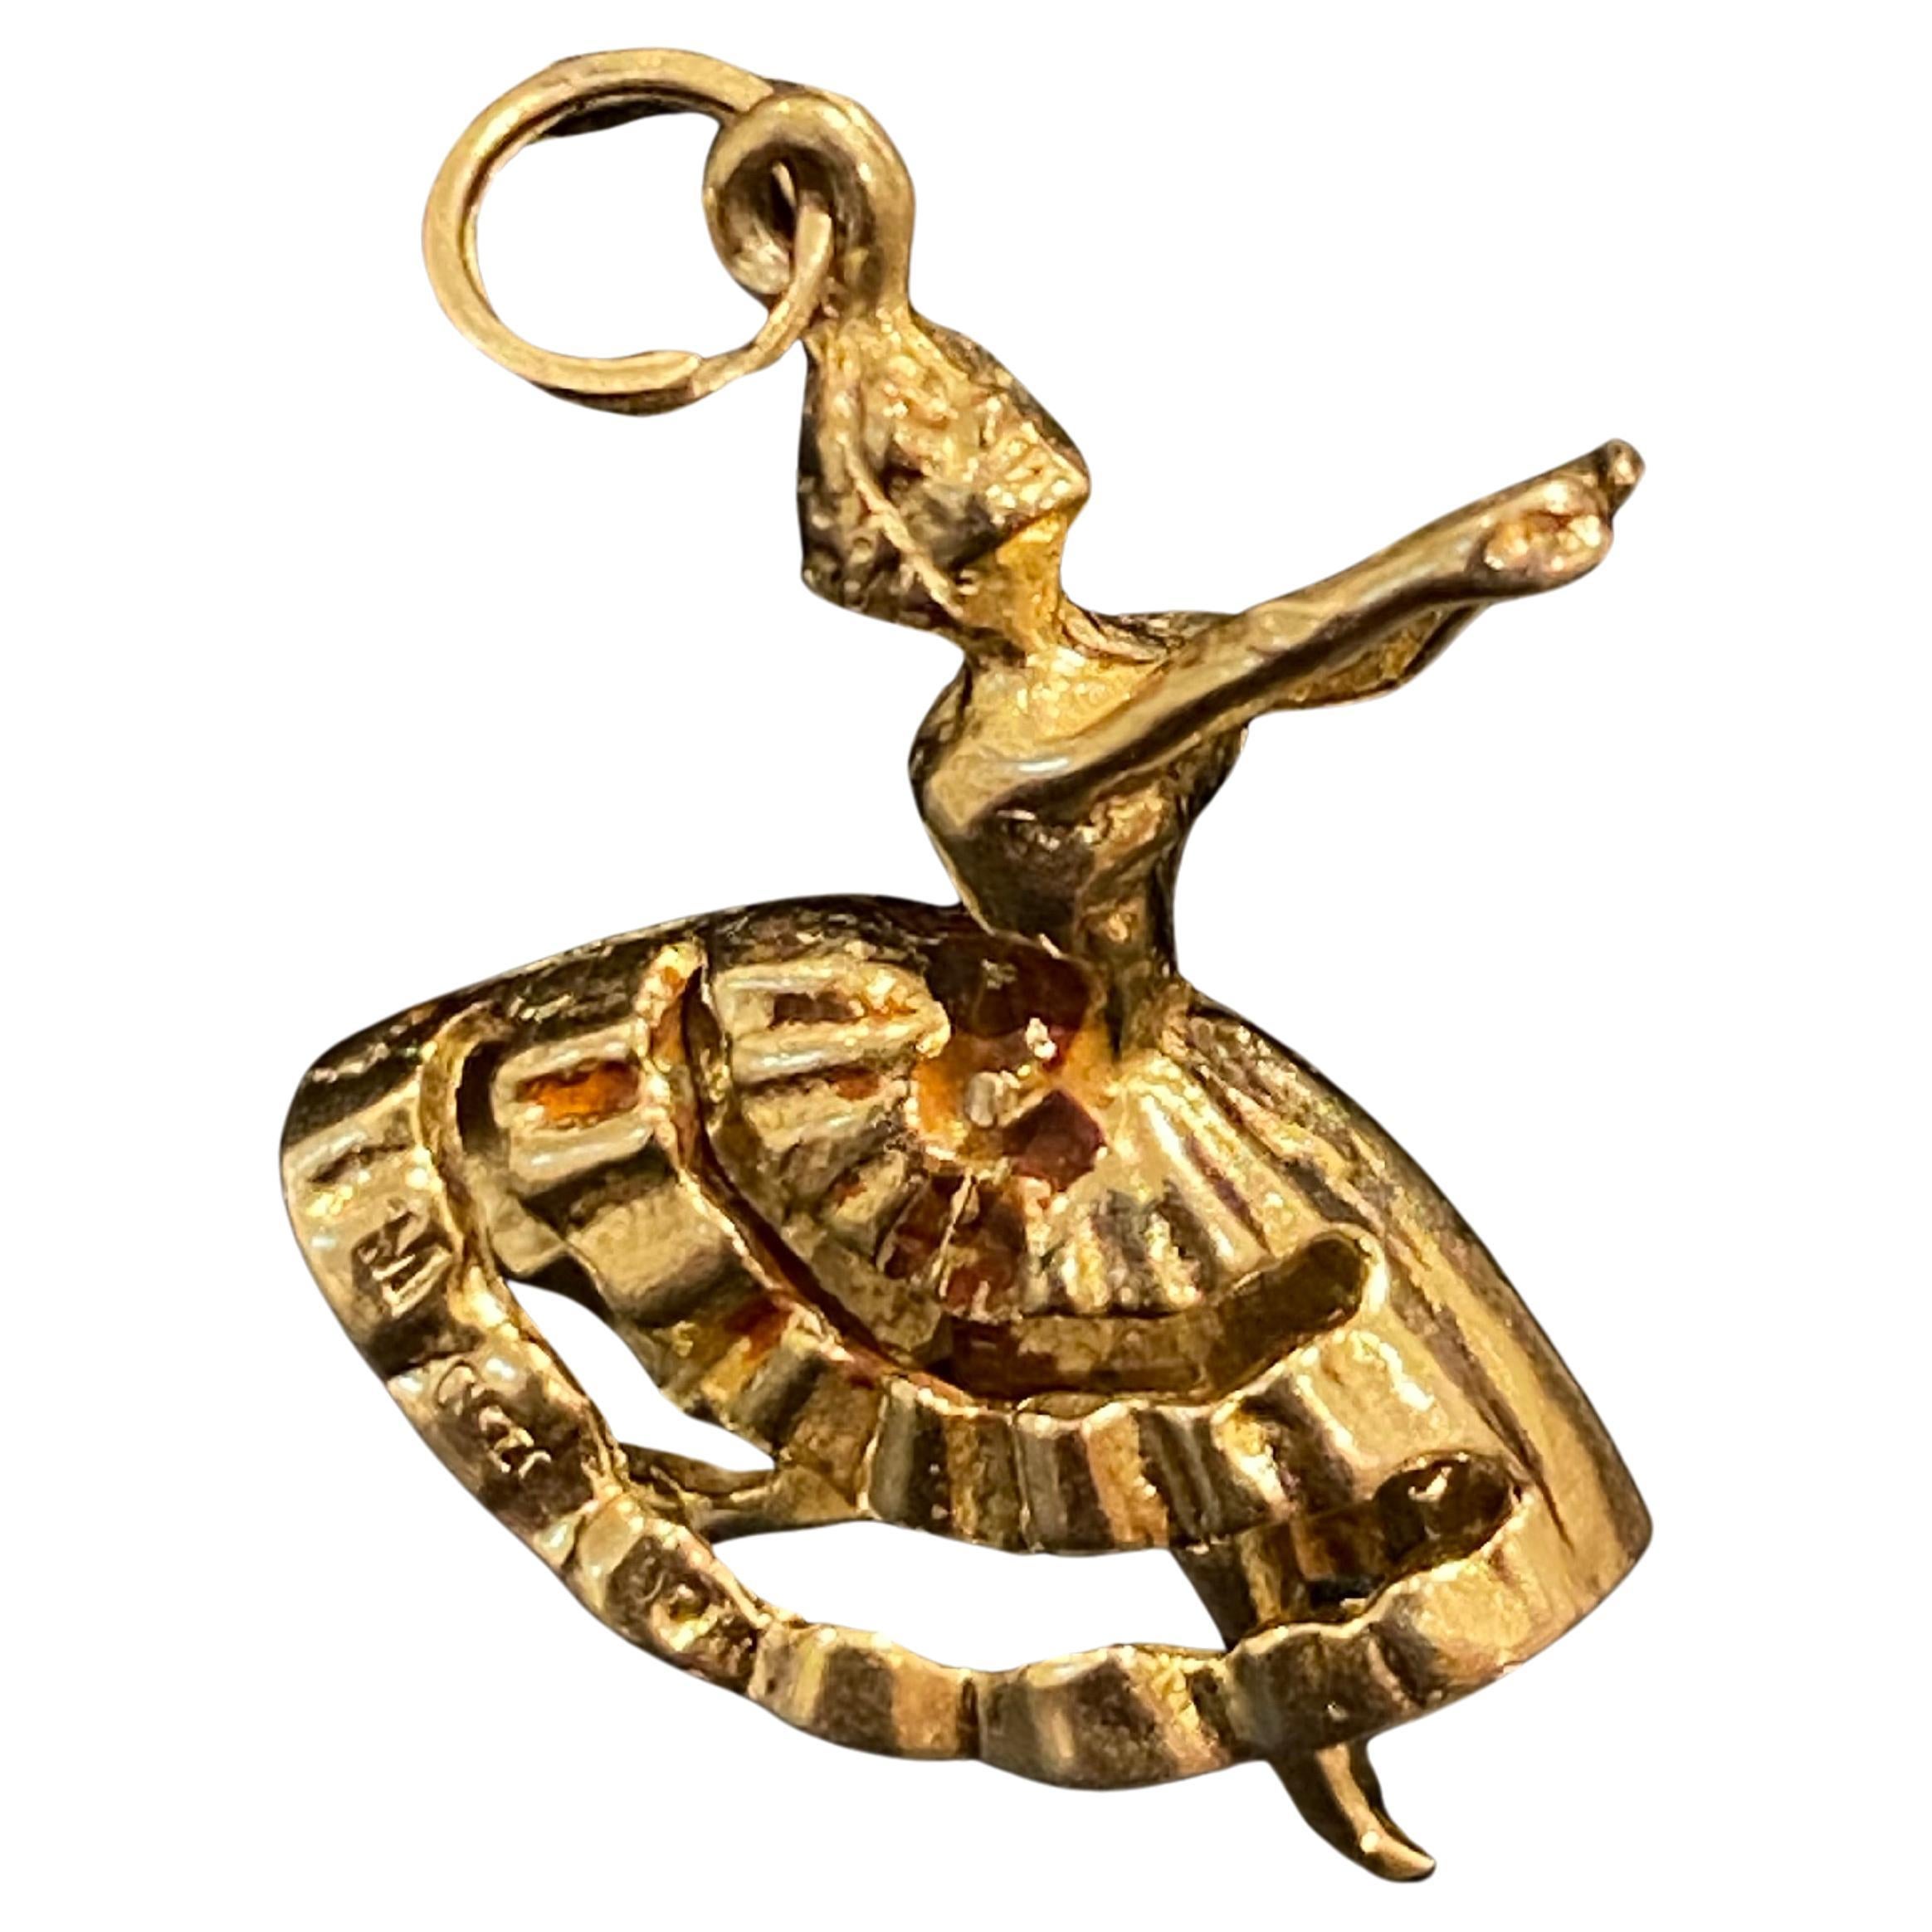 Superb 9K Yellow Gold Dancer / Ballerina with Moving Legs Charm. England, c1961.